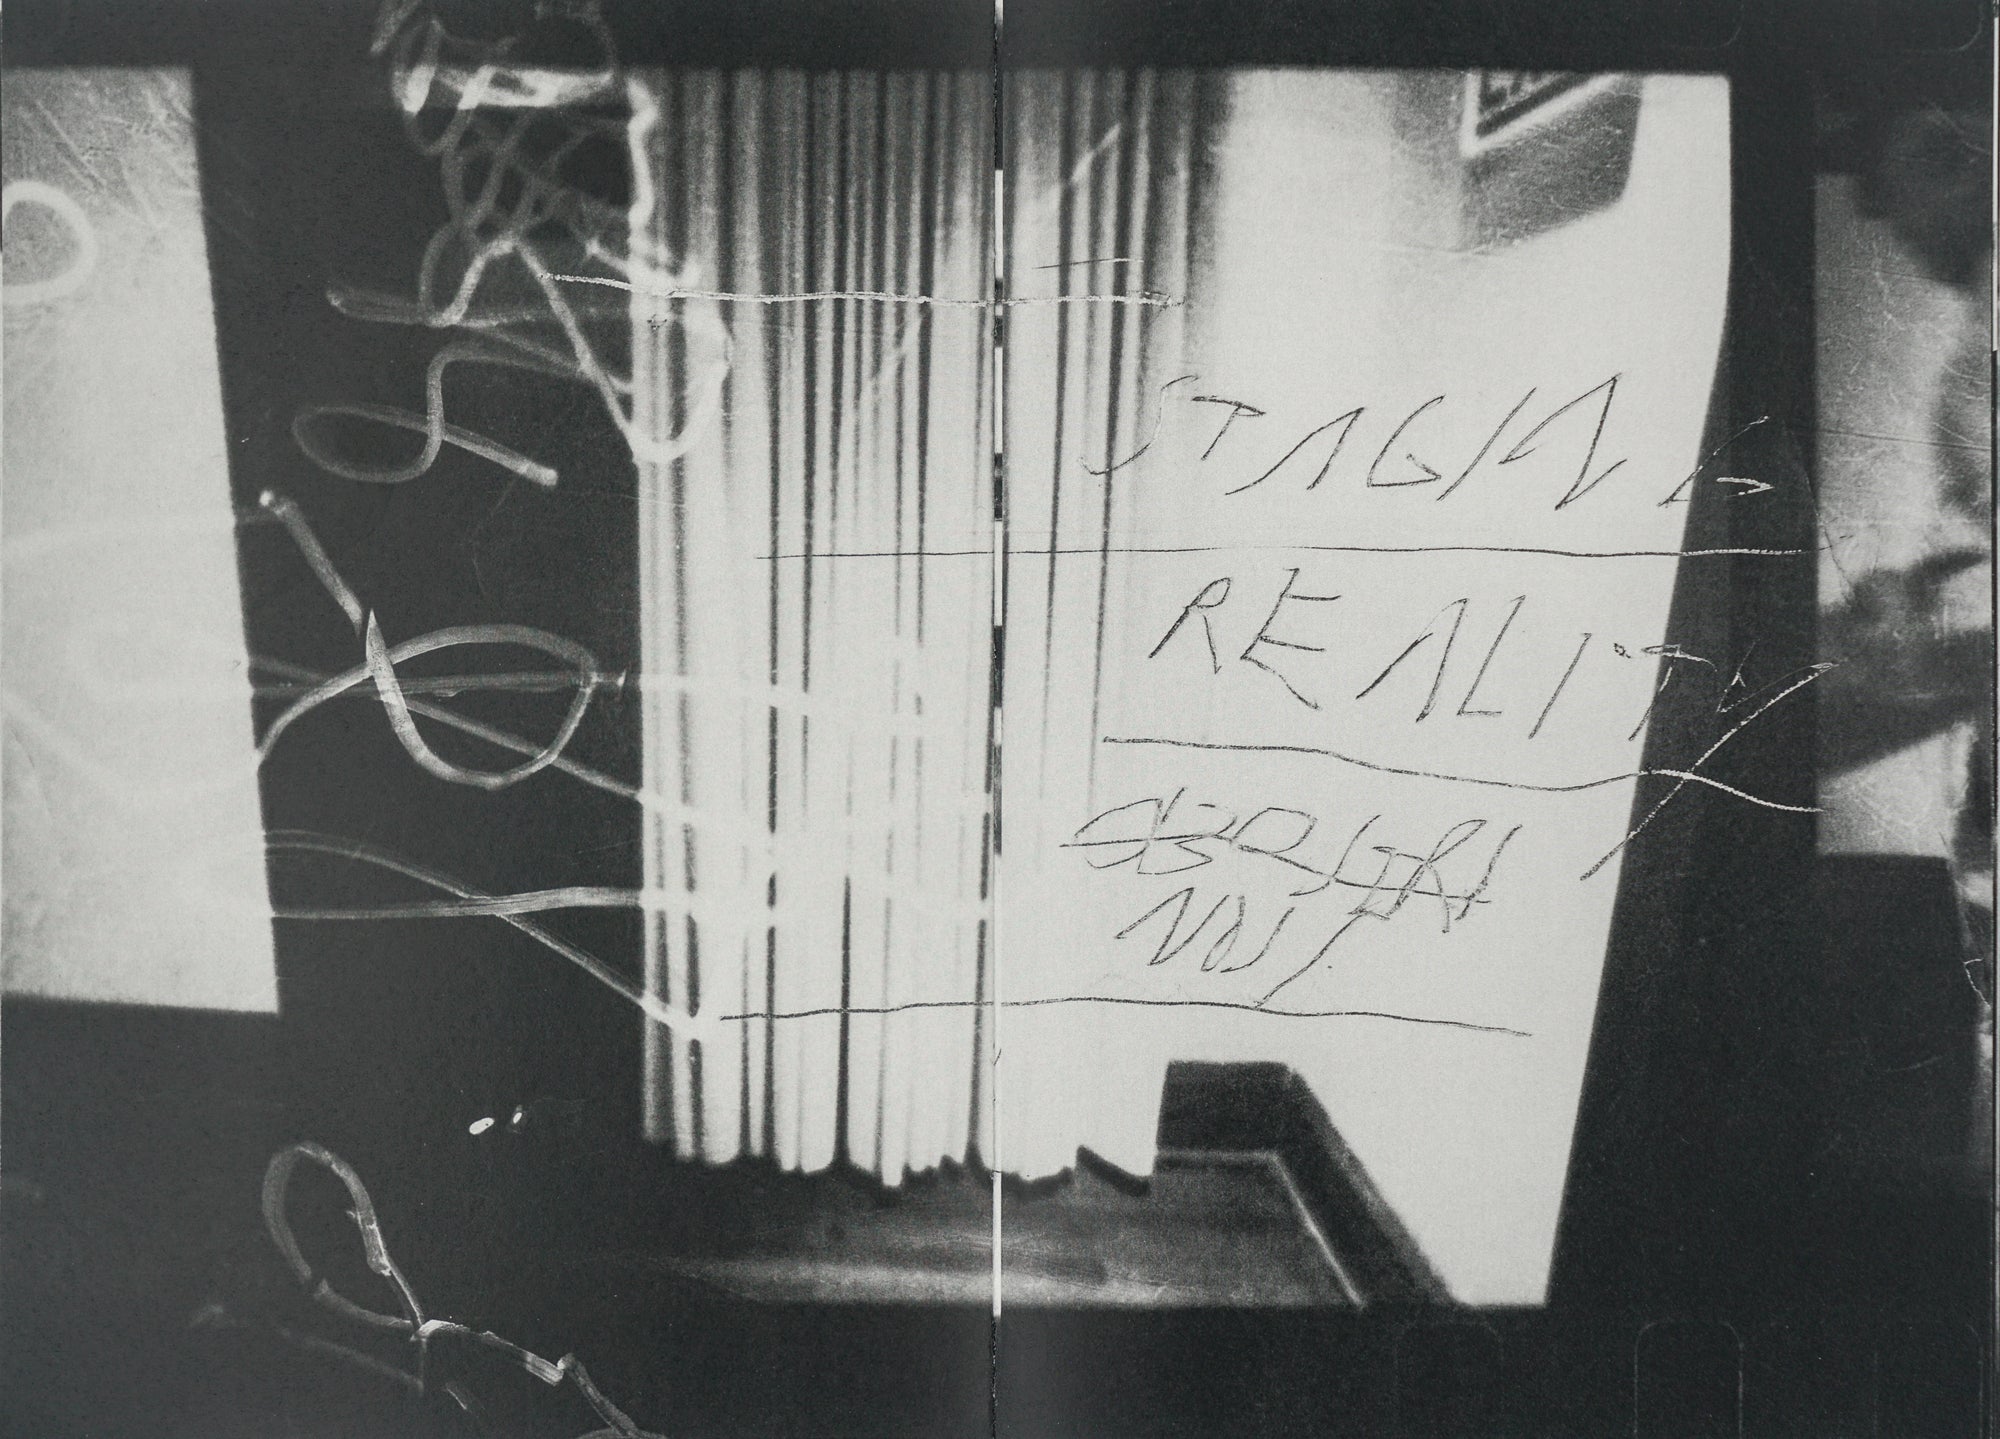 Spread from the book—a grainy black-and-white photograph of the corner of a room with curtains. STAGING REALITY and other illegible writings are scrawled on the image.